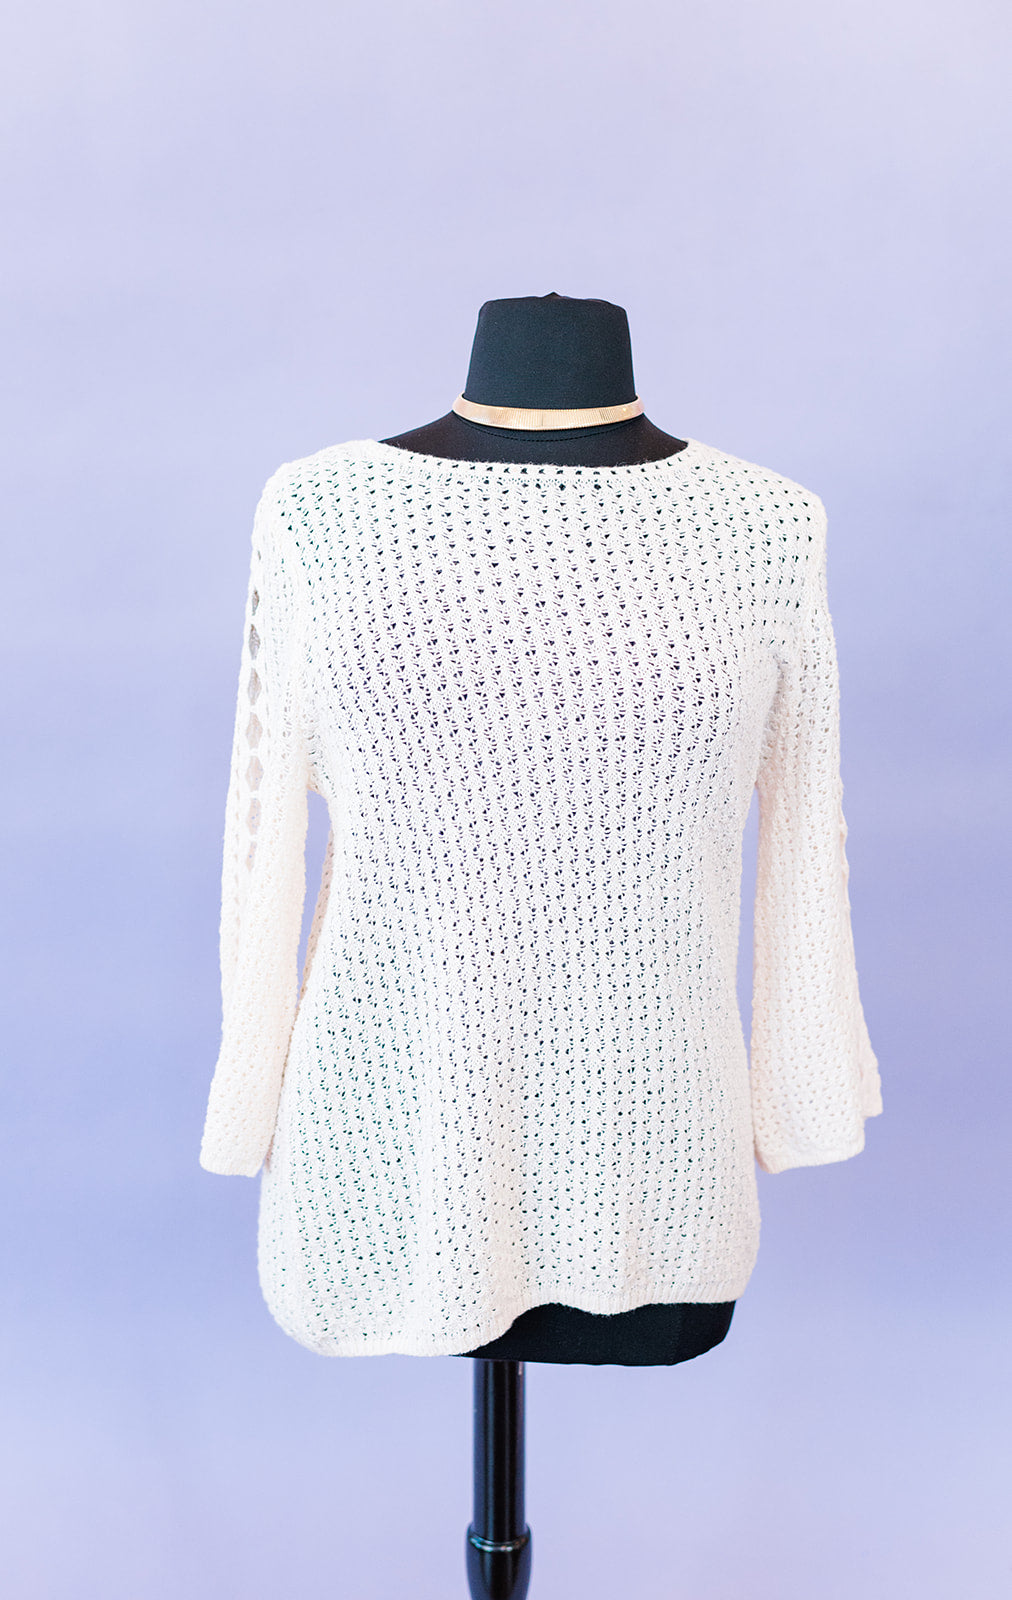 The Cora Top